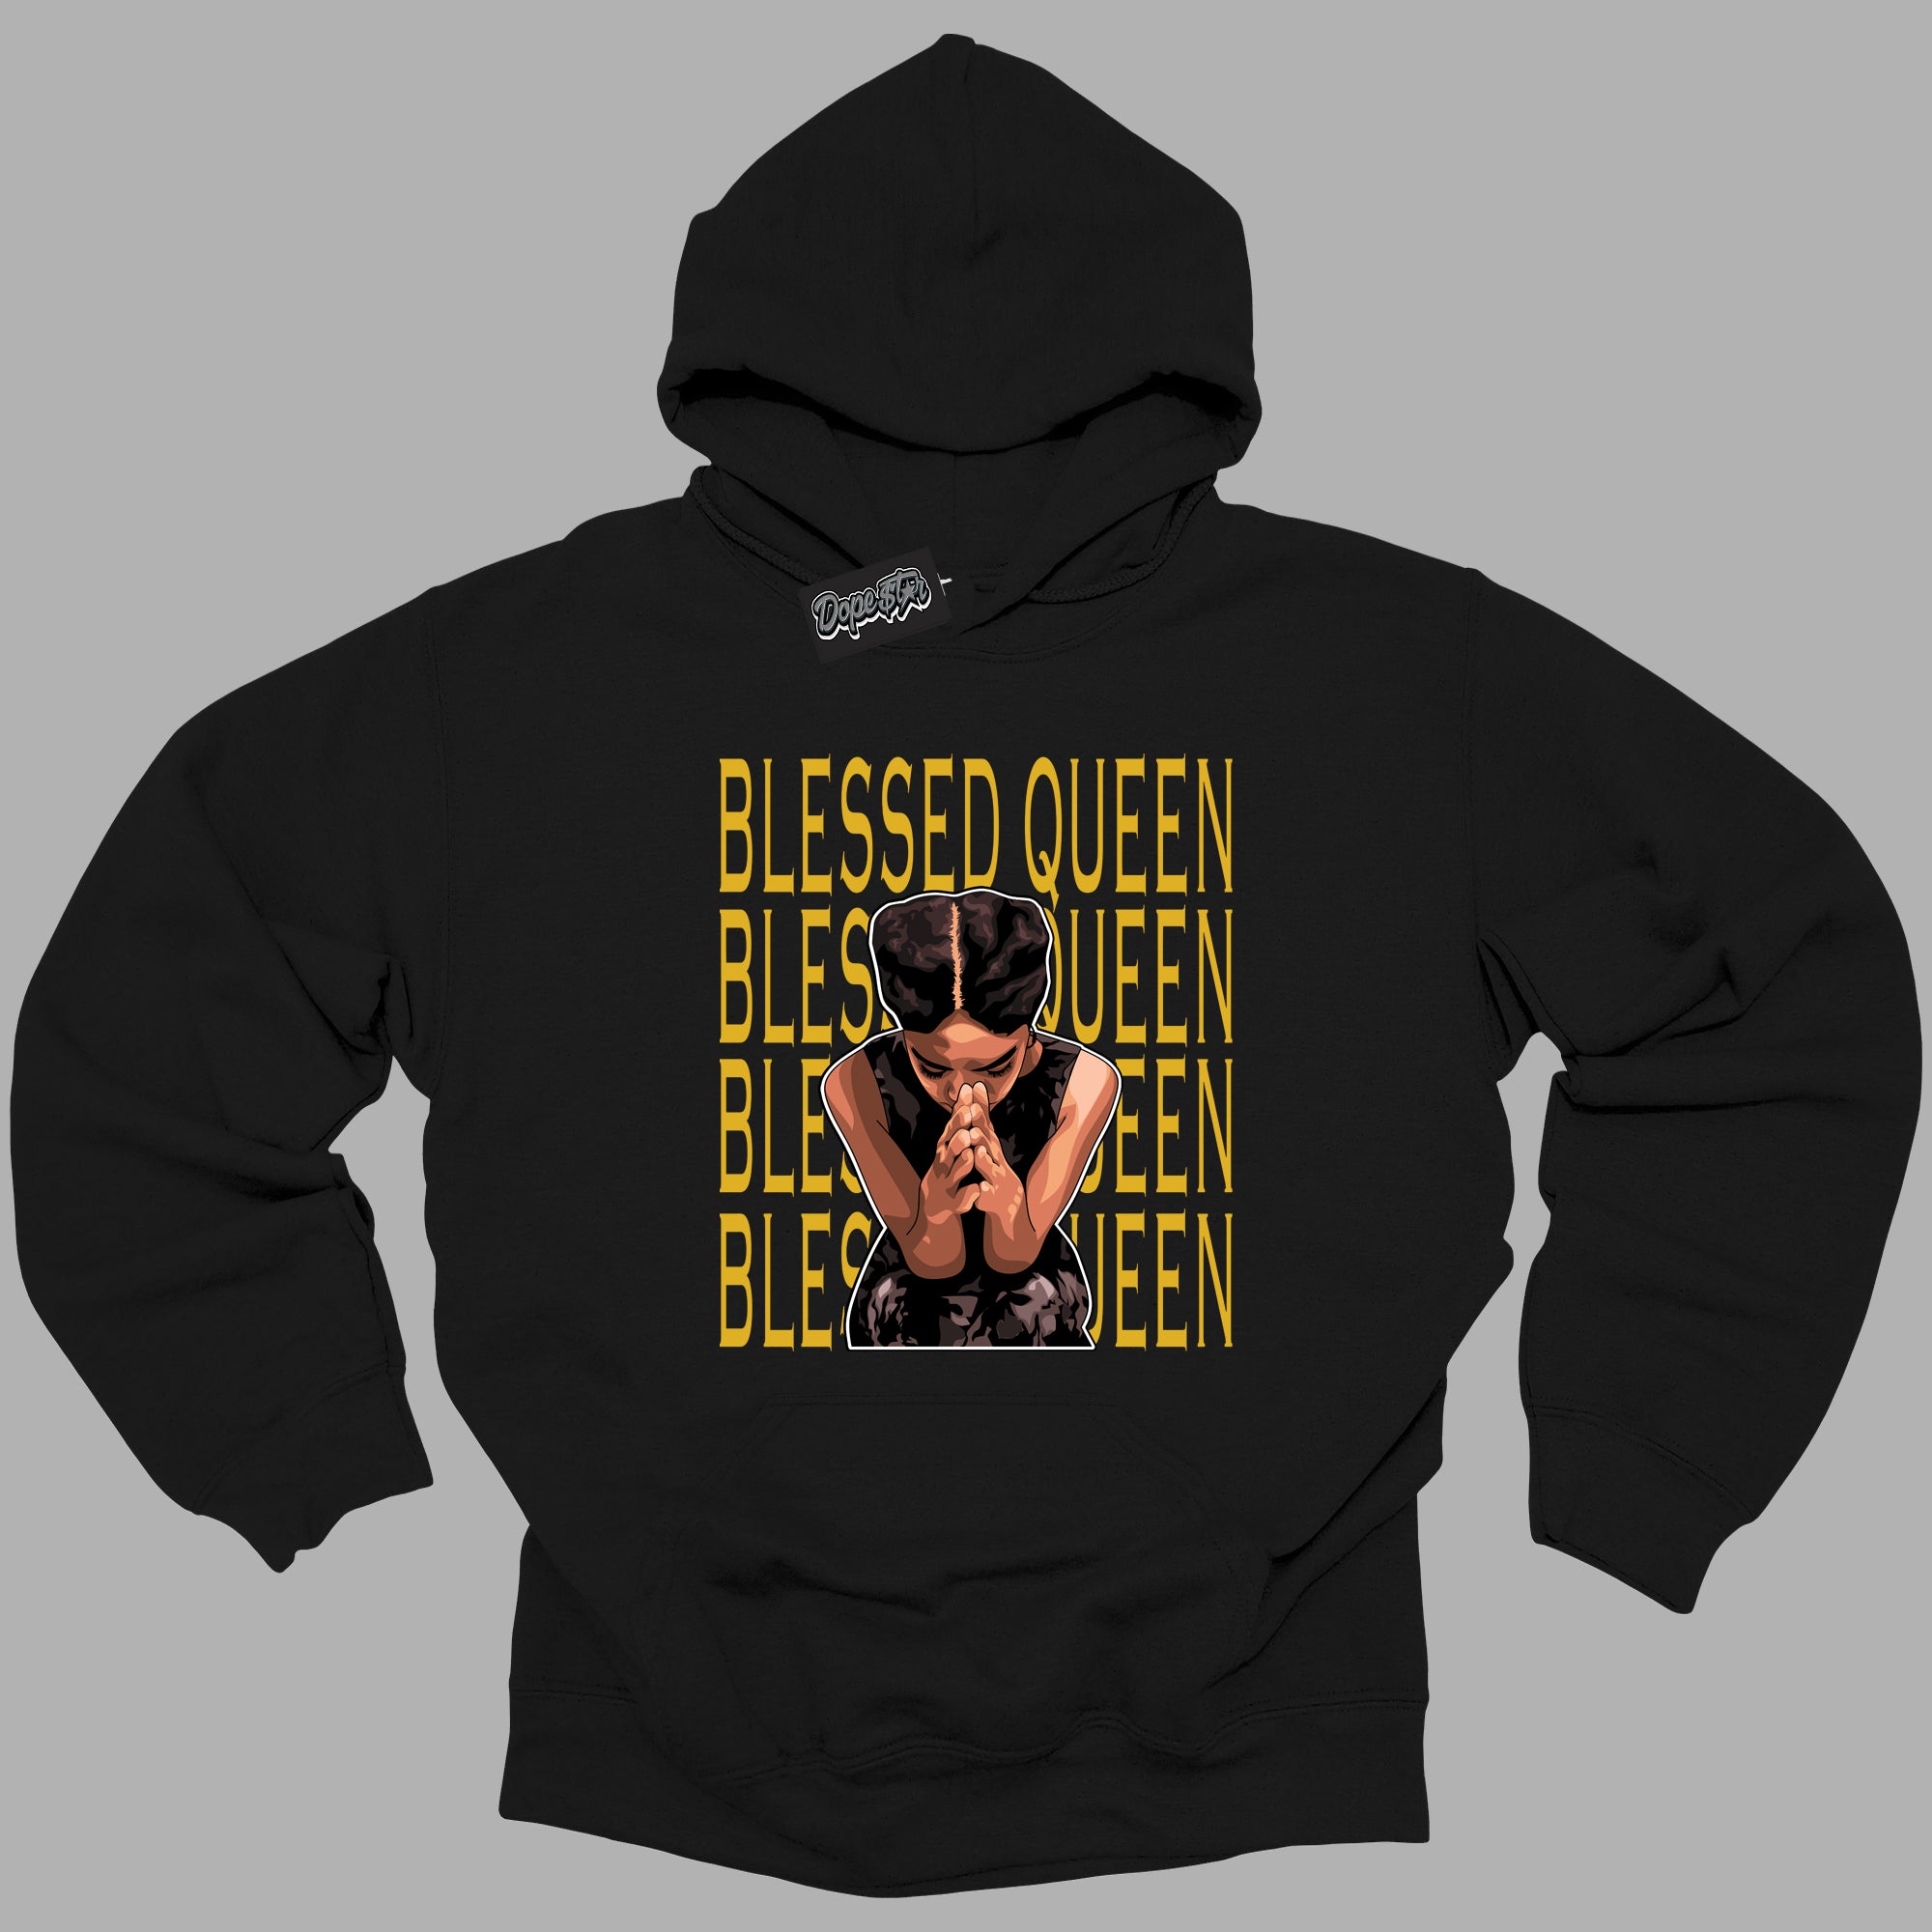 Cool Black Hoodie with “ Blessed Queen ”  design that Perfectly Matches Yellow Ochre 6s Sneakers.